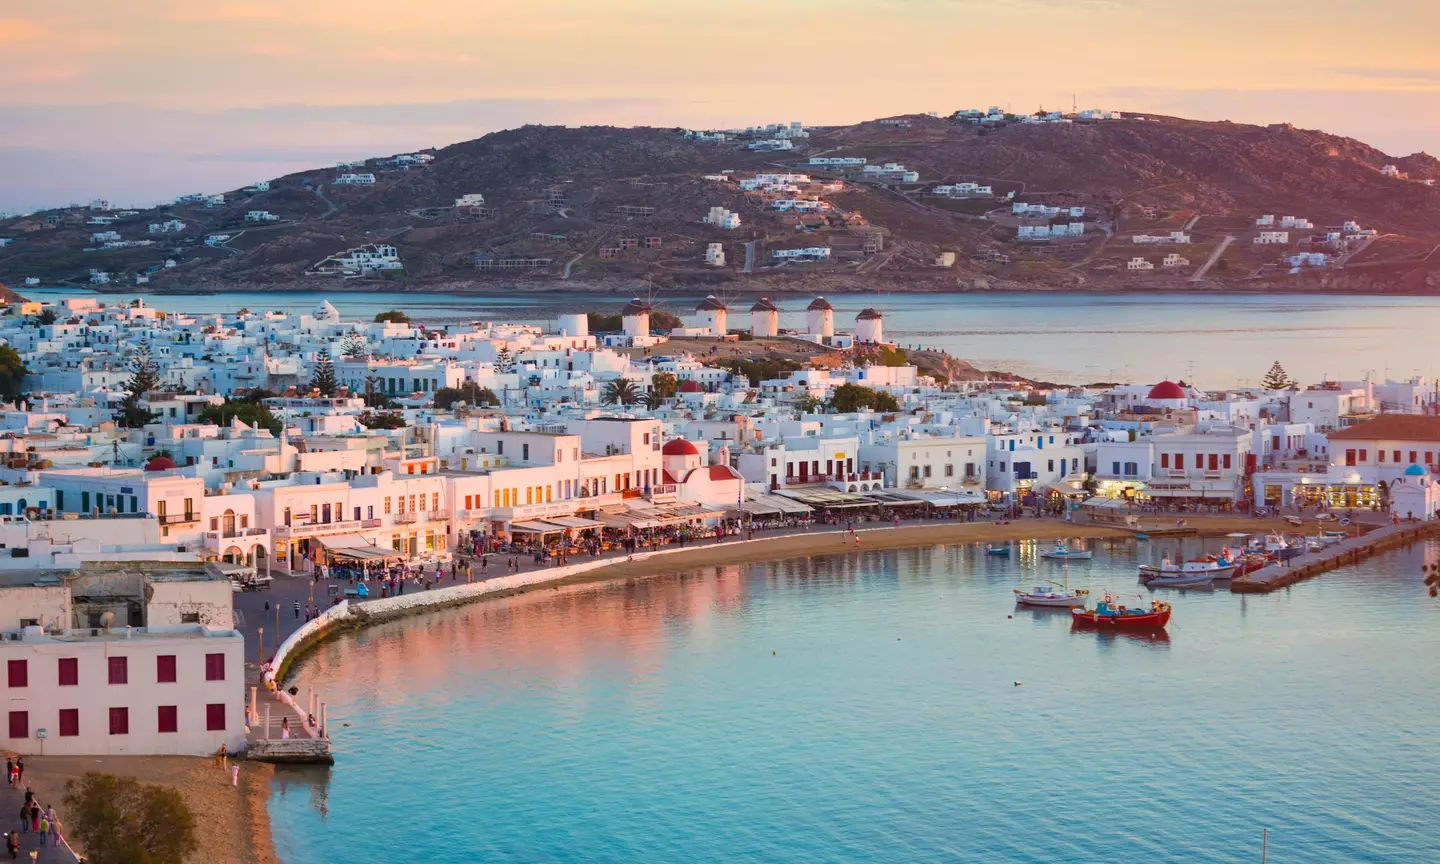 The bar is located in Mykonos (Getty Stock Photo)